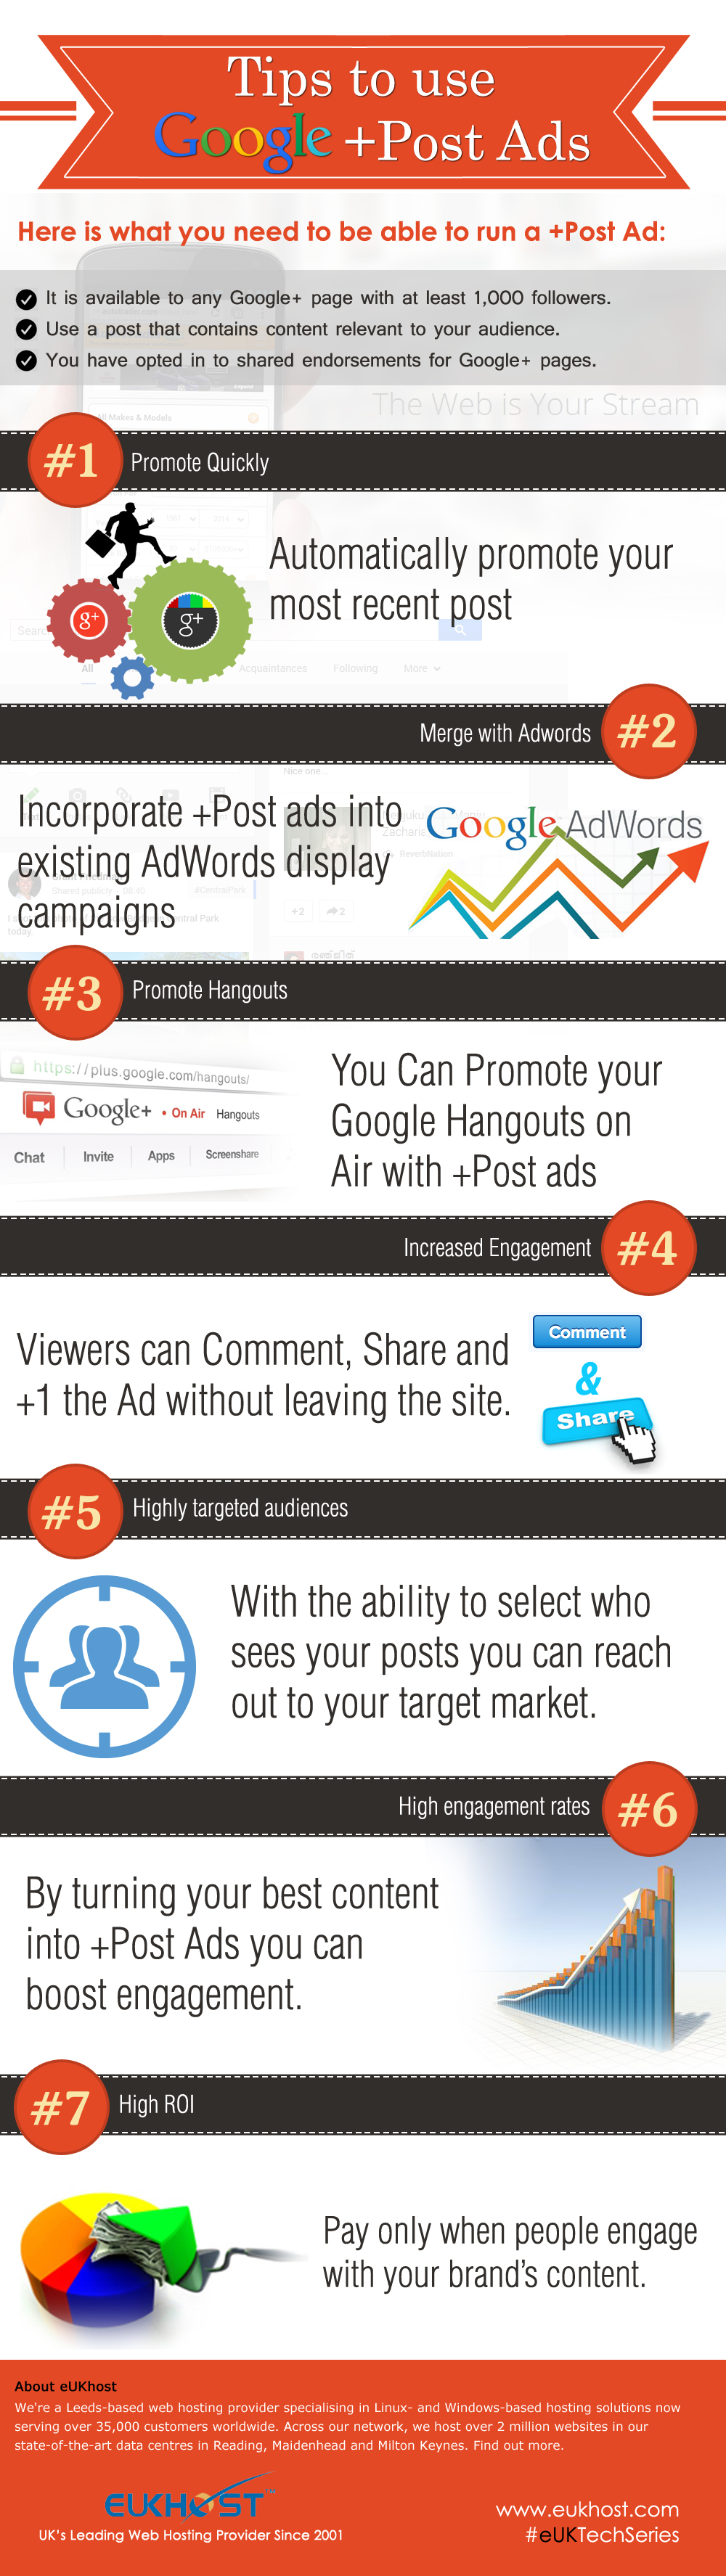 Tips to use Google Plus Post Ads